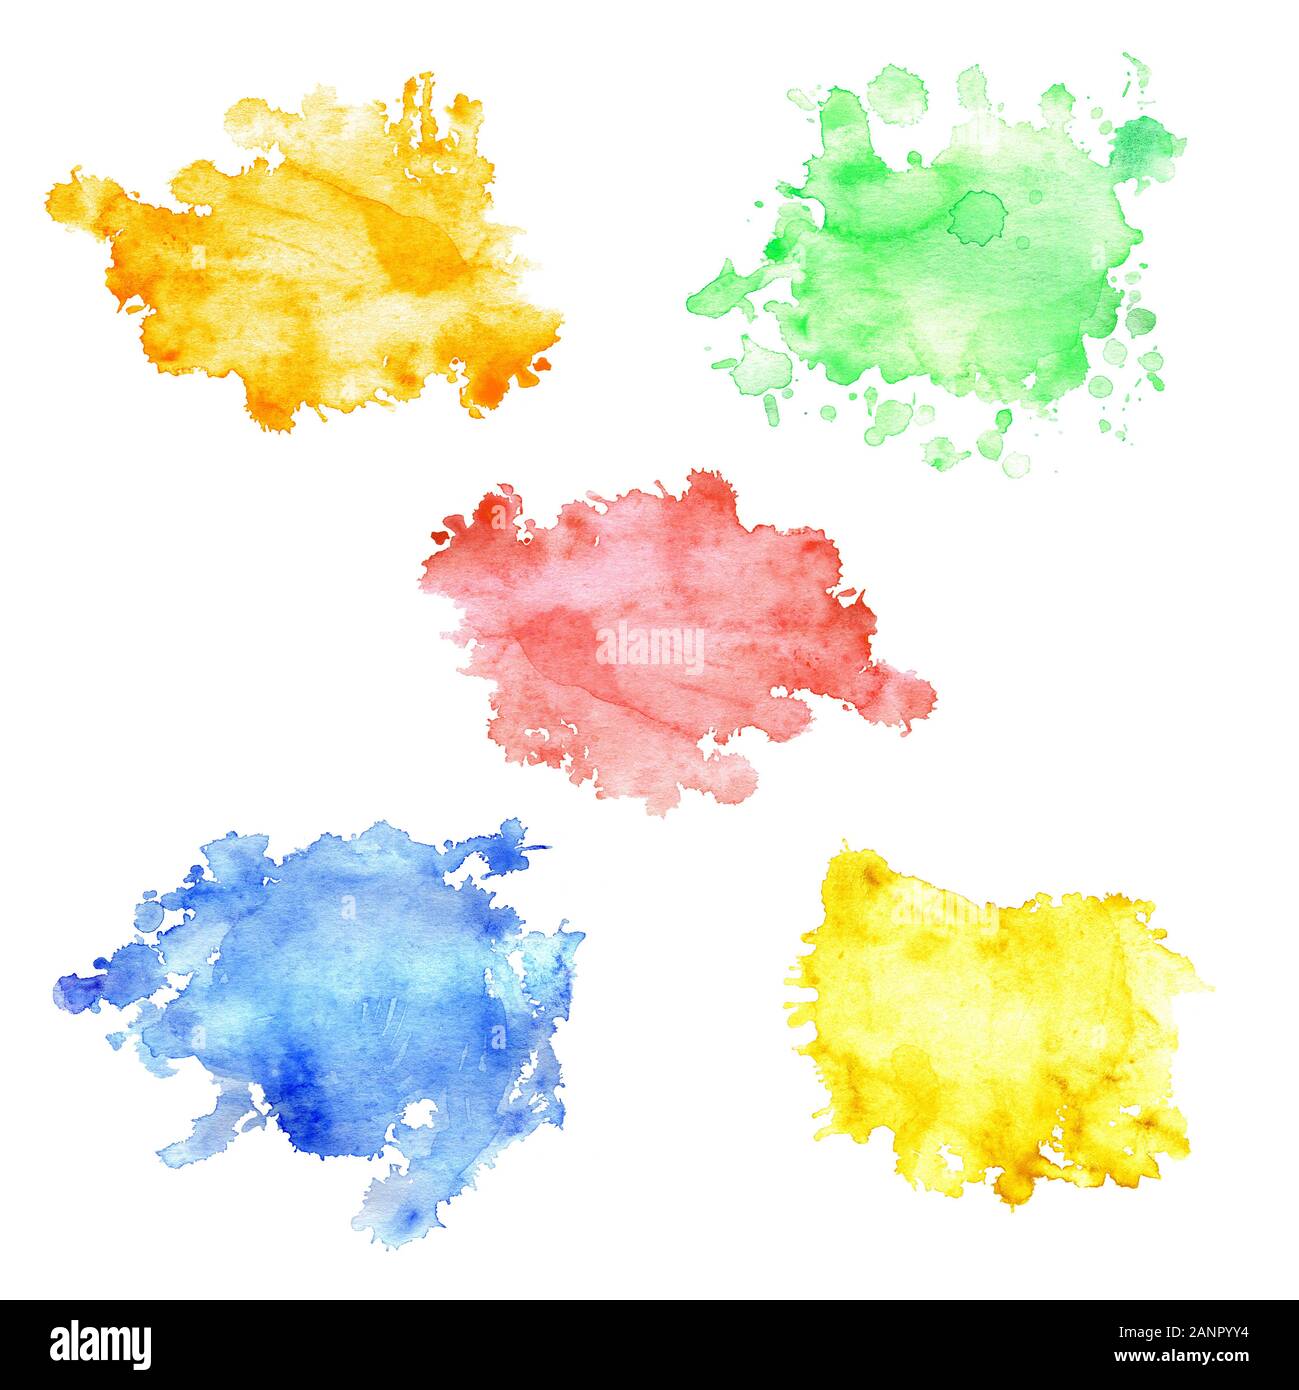 Set of watercolor stains with splashes and stains. Watercolor stains of orange, pink, green, yellow and blue. Isolated blots on a white background, ha Stock Photo